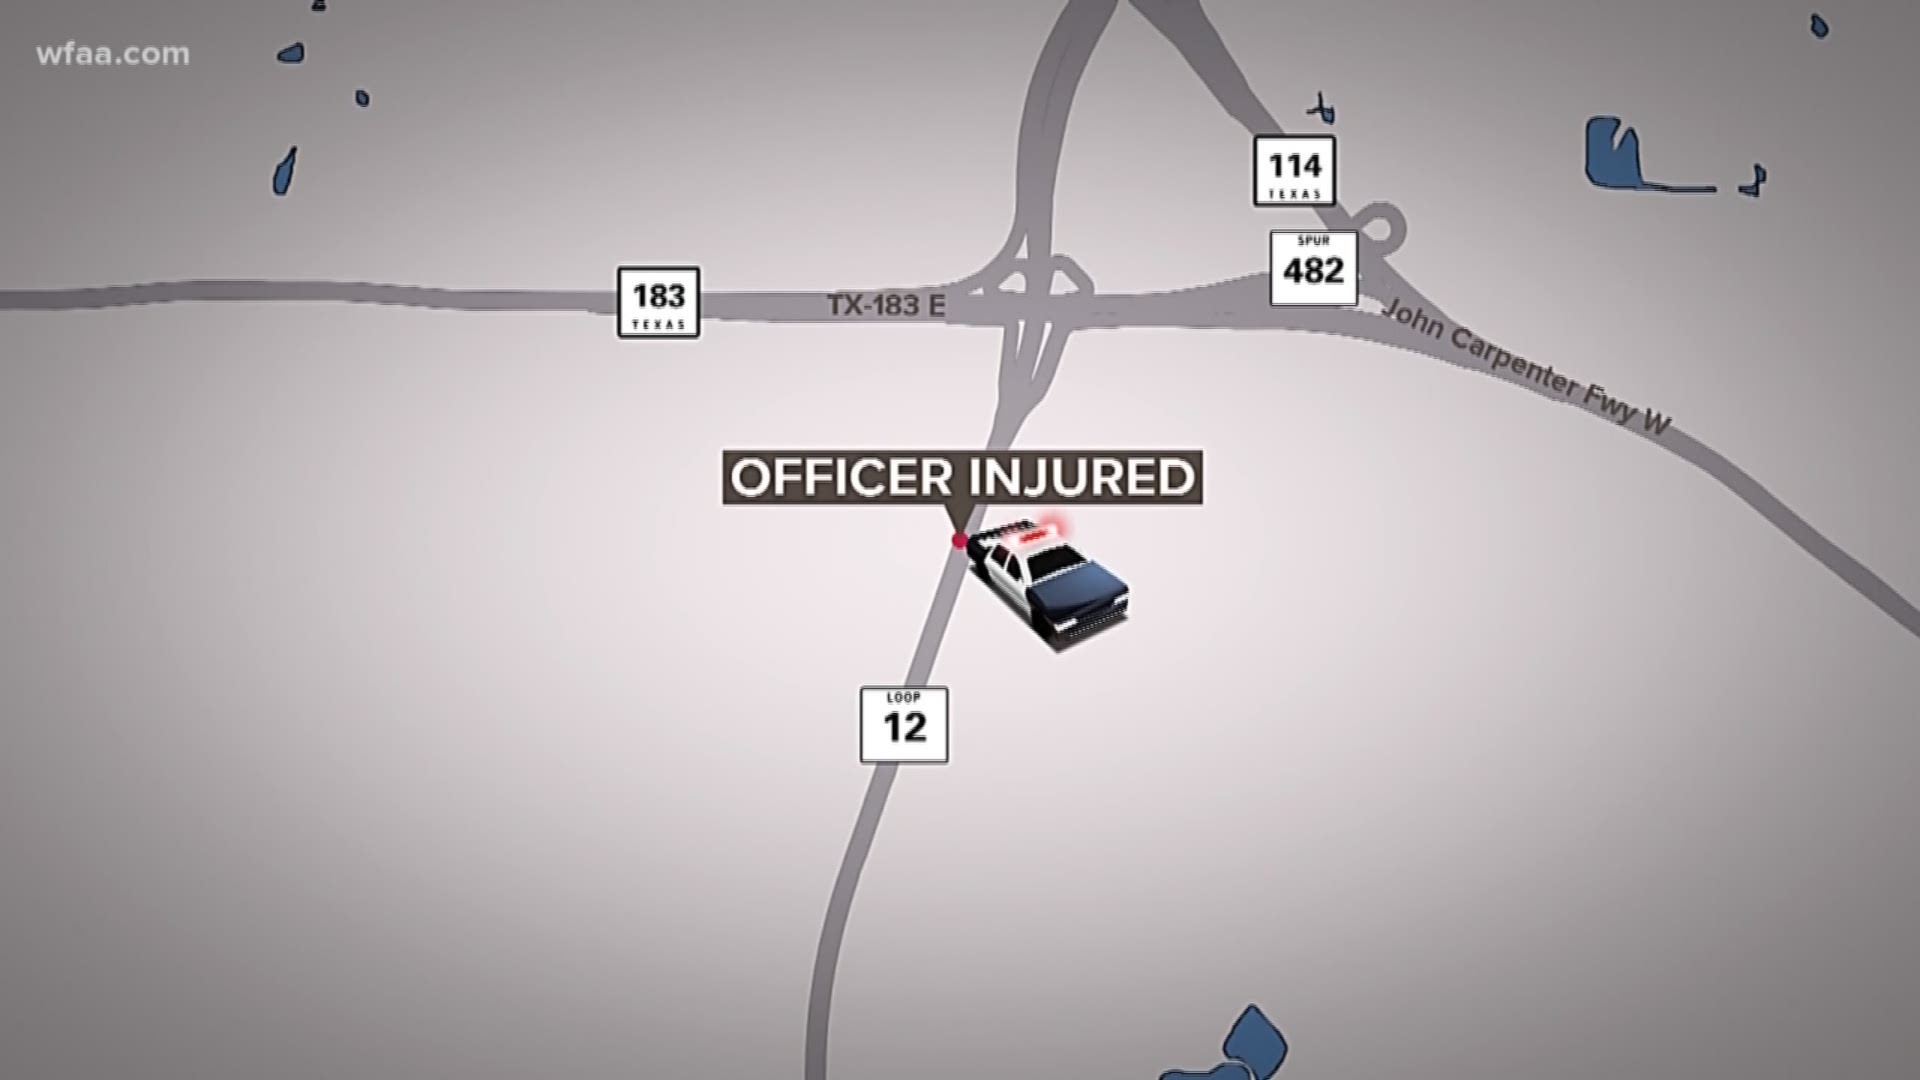 An Irving police officer was injured Sunday morning by a suspected drunk driver who crashed into her car at an accident scene, Irving Police said.